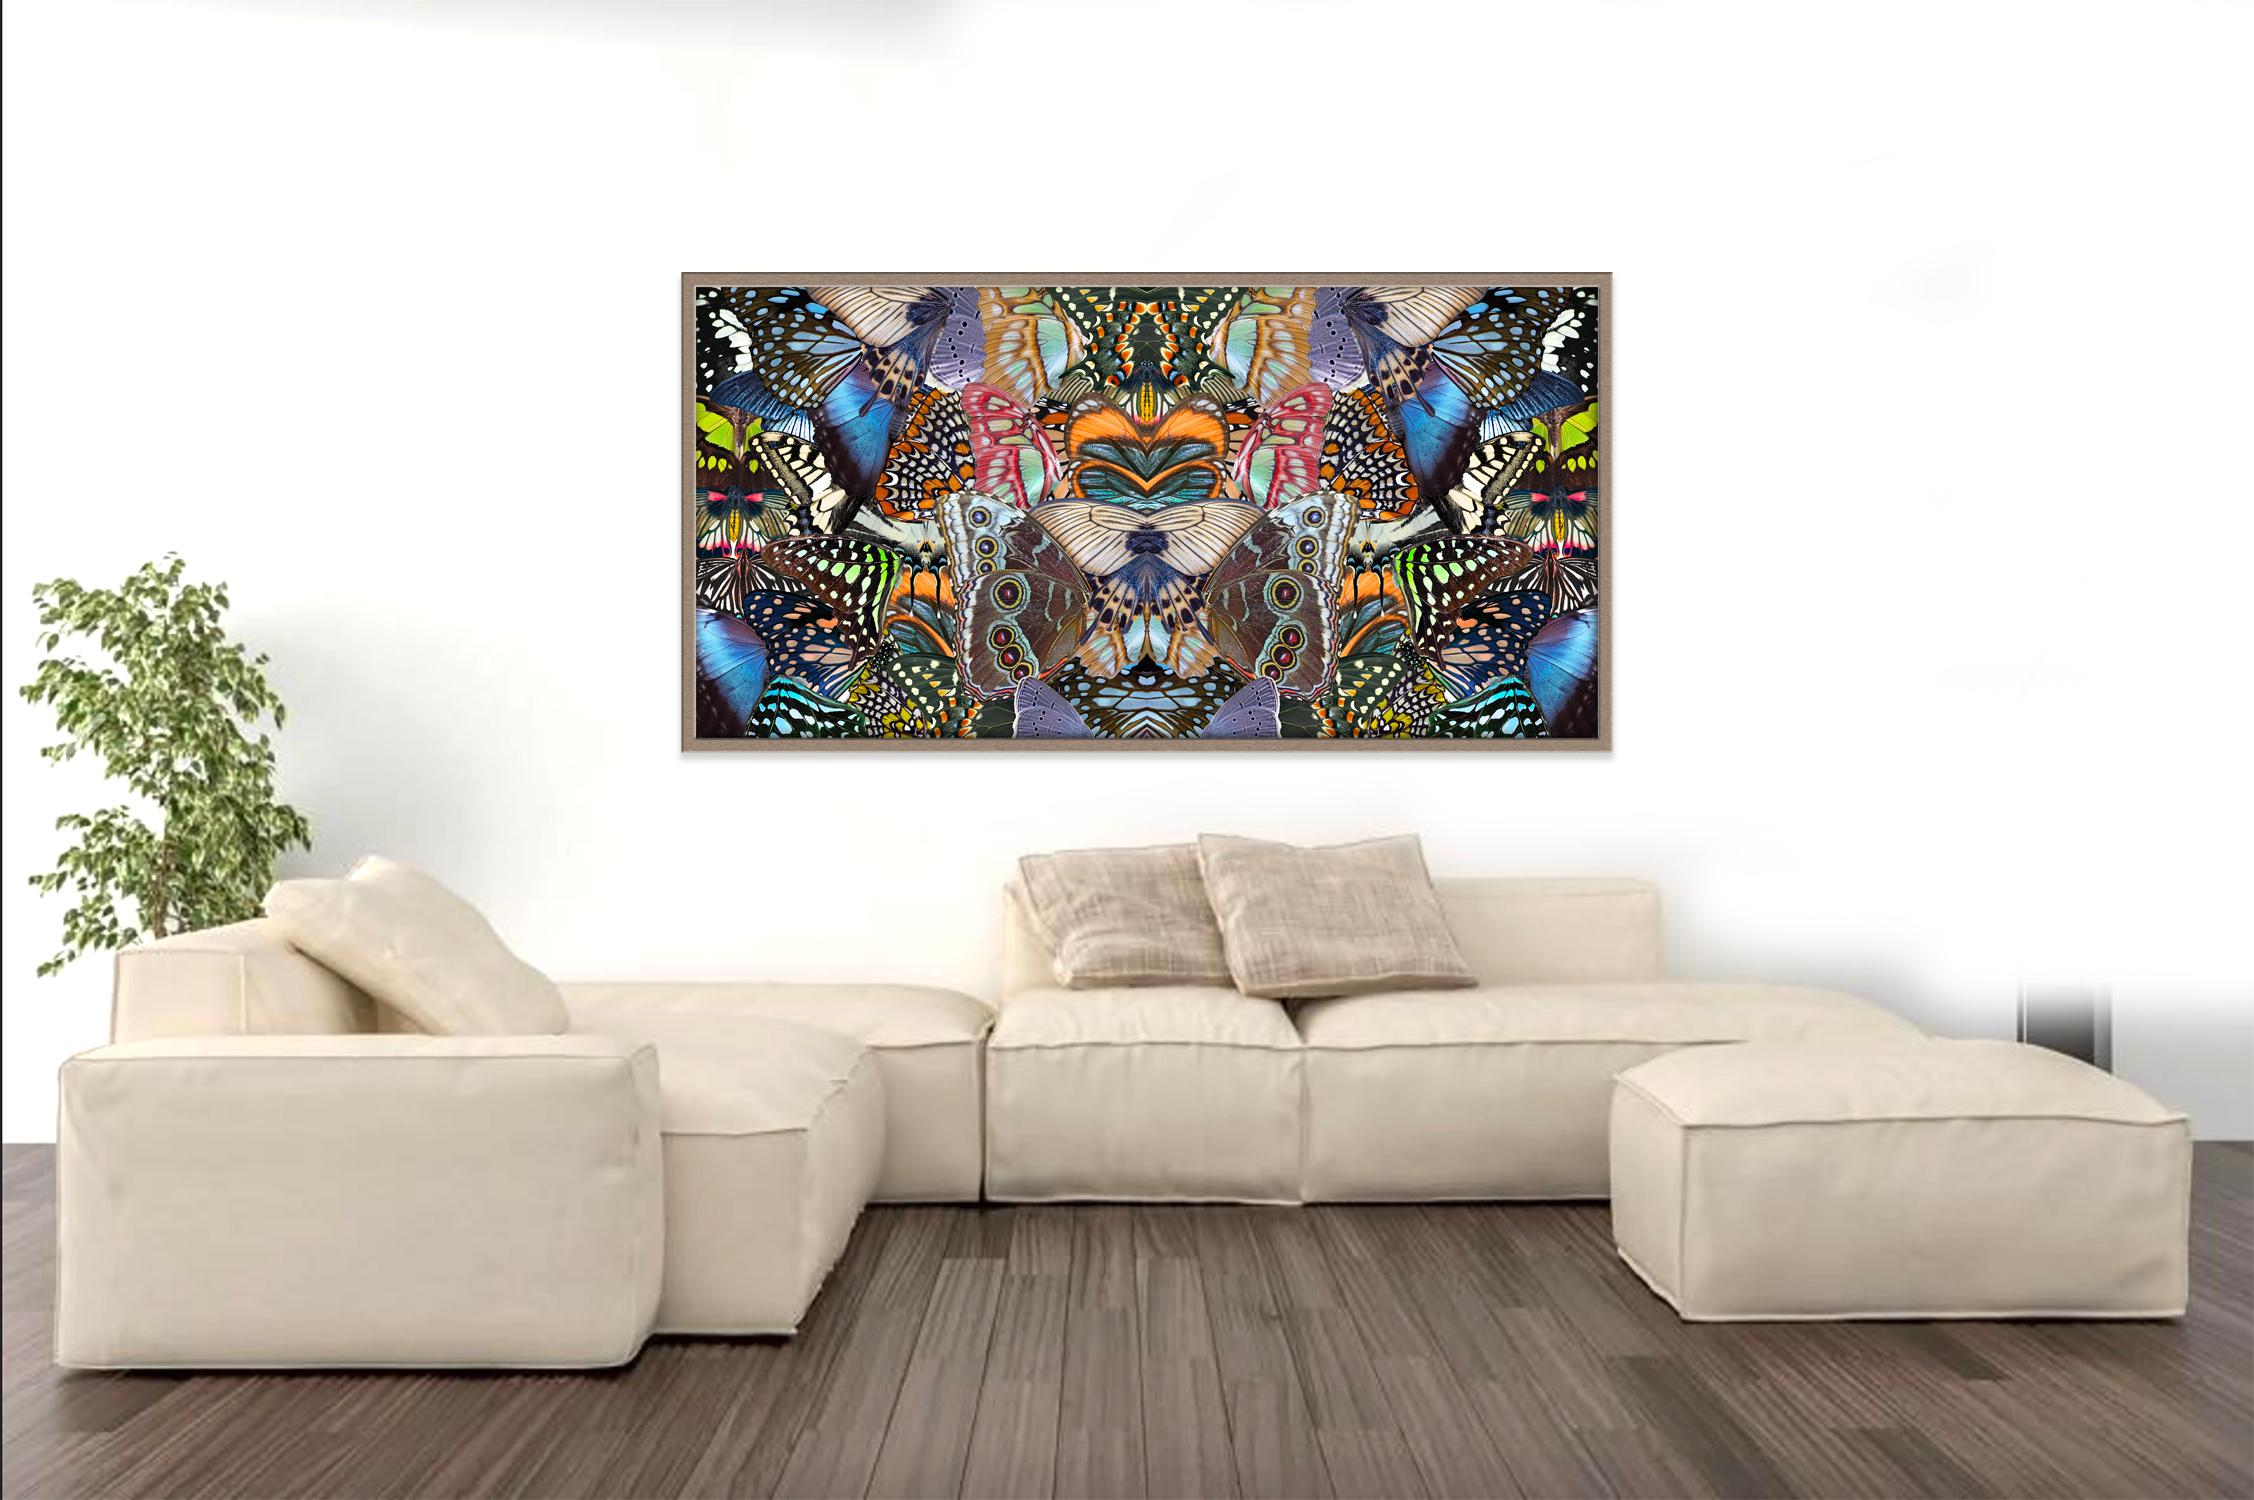 Archival print on canvas, limited edition of 20 - artwork can be shipped in a tube or framed in a crate